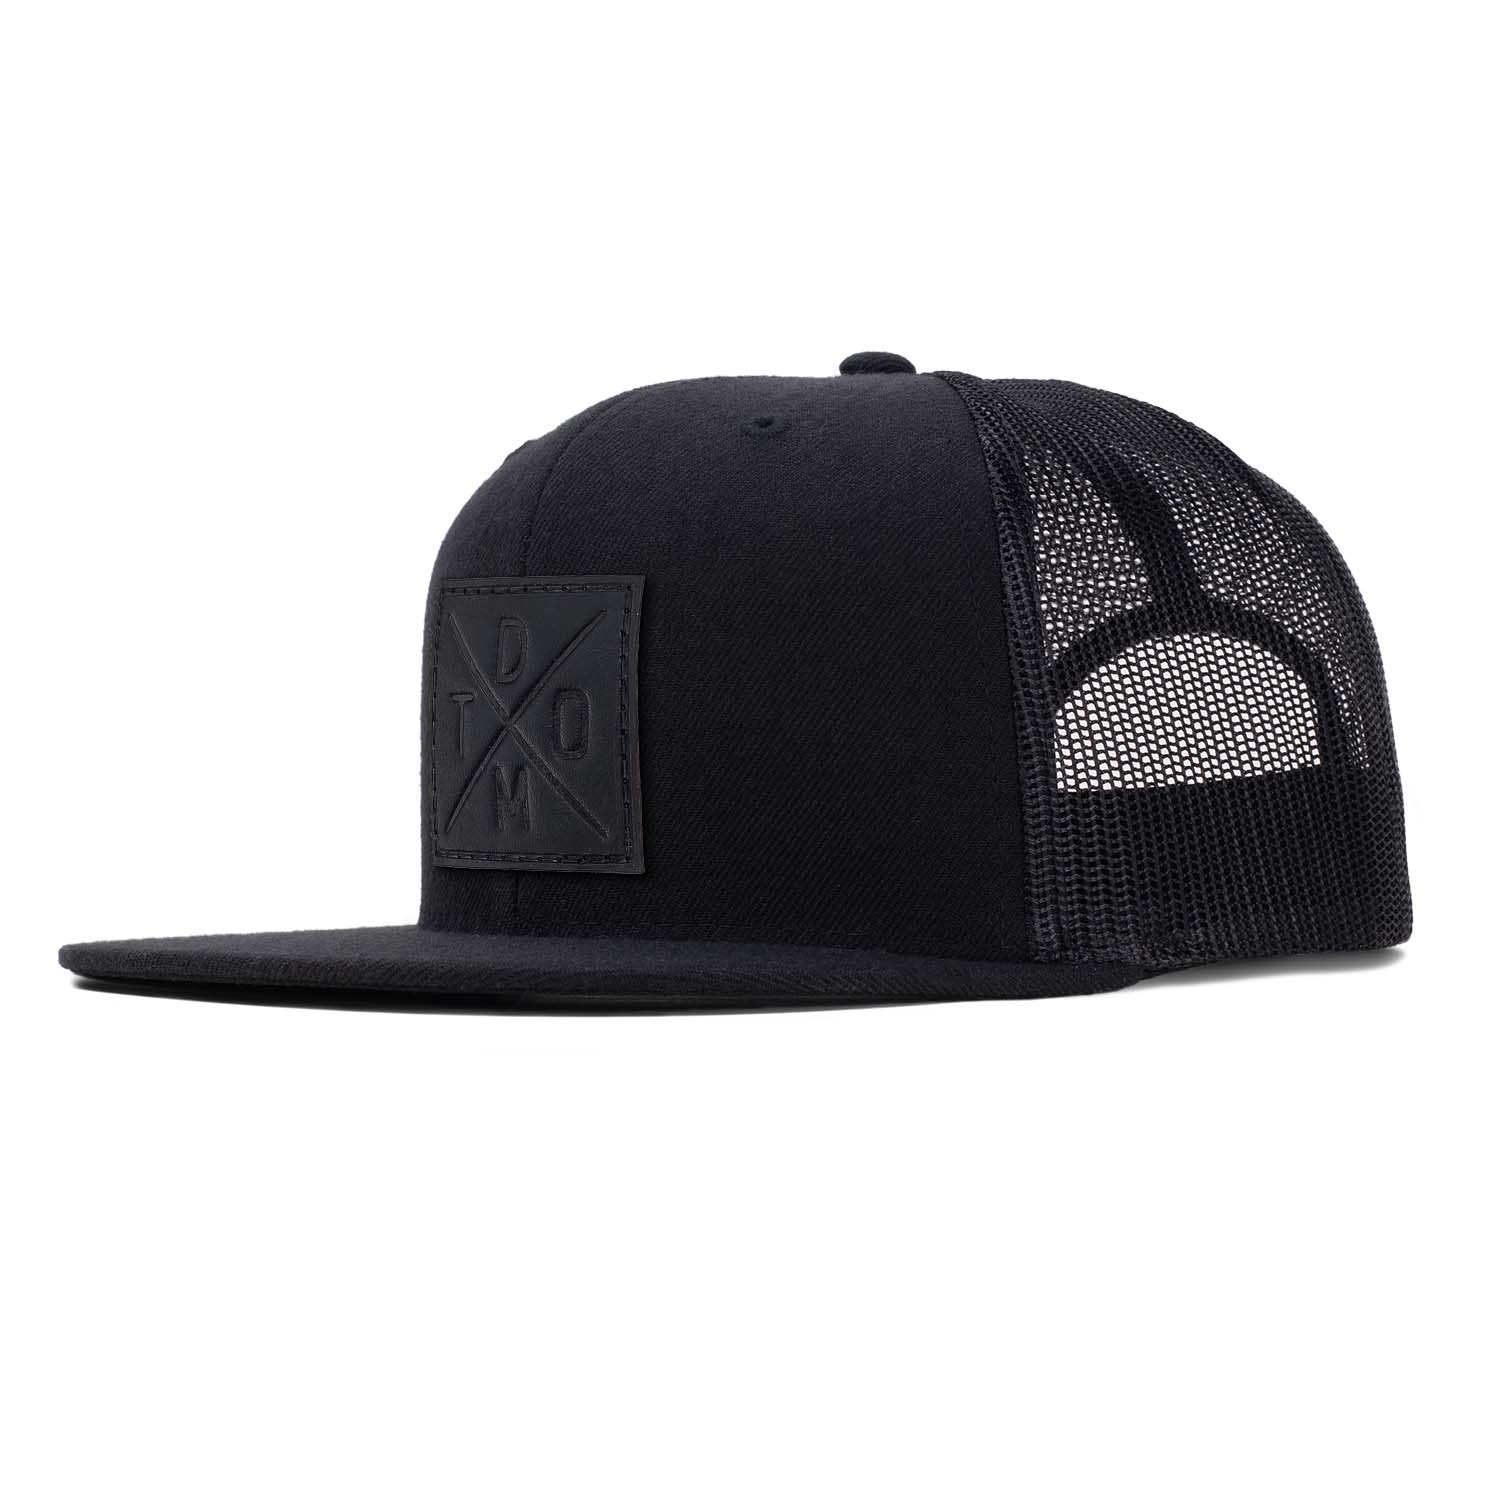 Black full grain leather debossed square DTOM patch on a black flat bill hat with black mesh